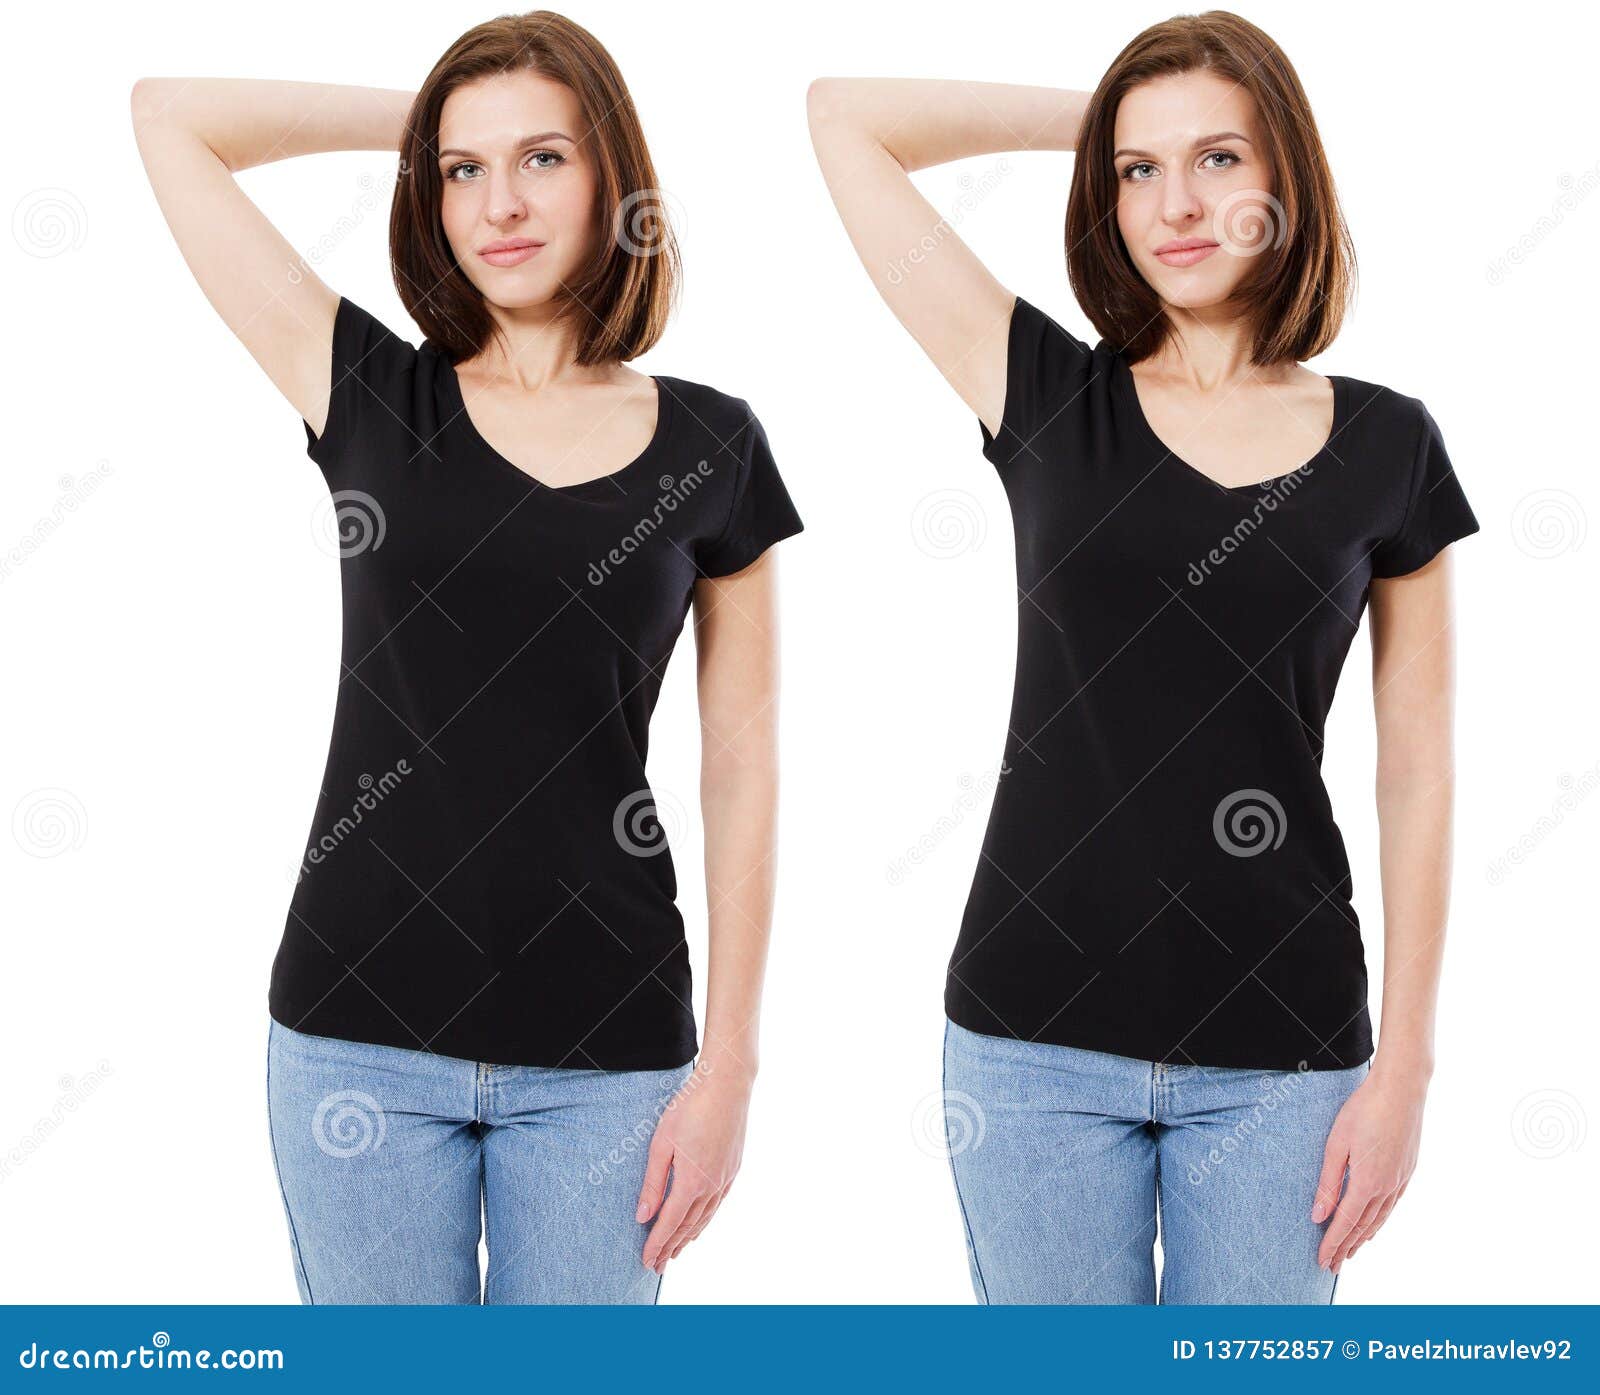 Download Mockup Of A Template Of A Black Woman`s T-shirt On A White ...